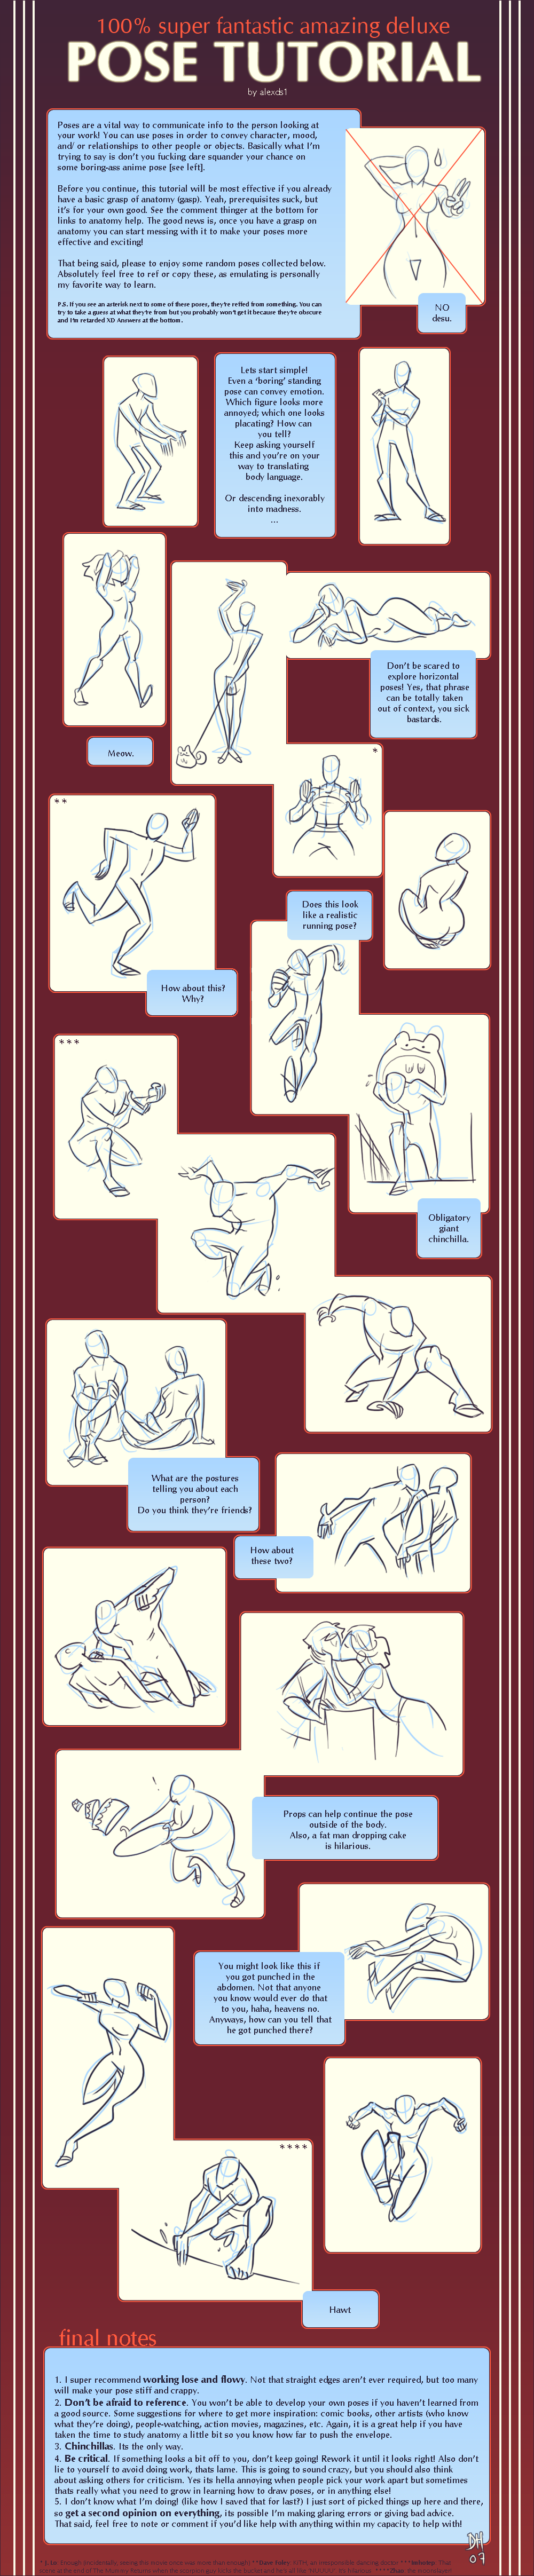 Poses are a vital way to communicate  info to the person looking at your work. Use this poses to convey your characters mood and relationship.